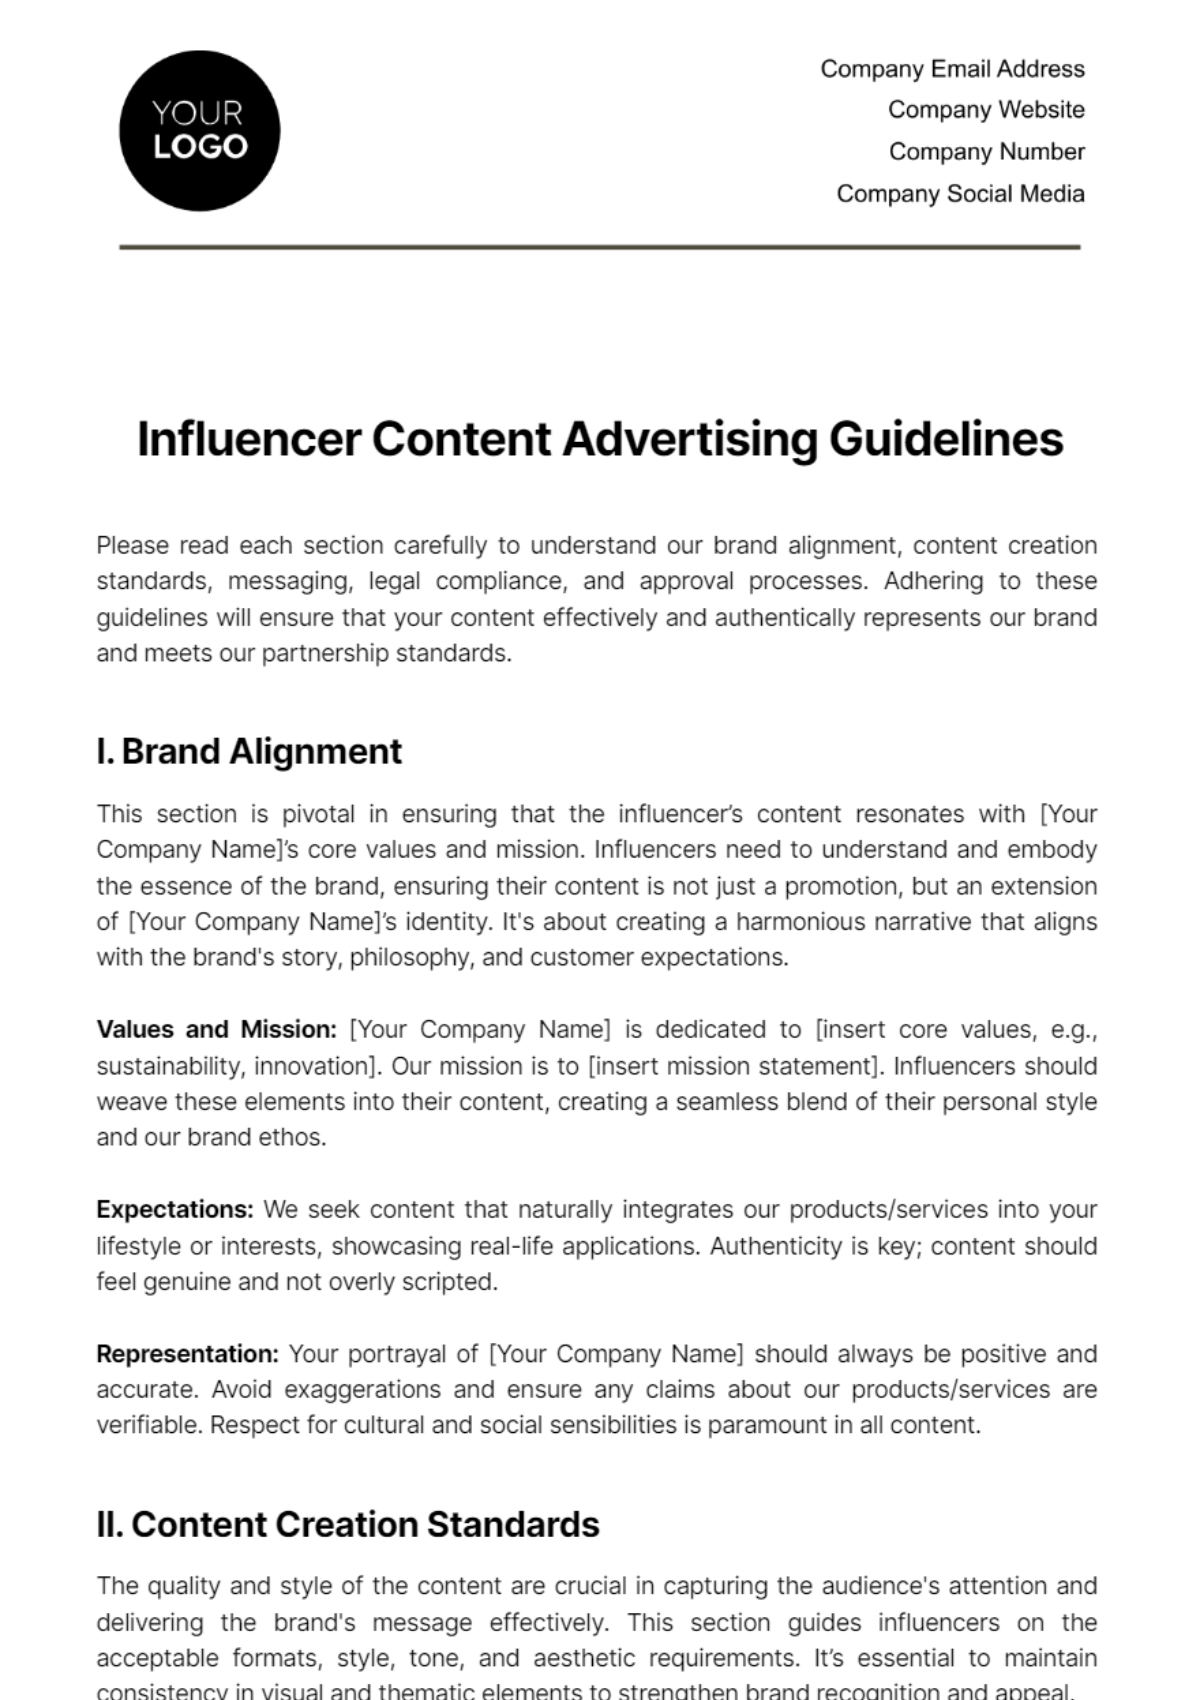 Free Influencer Content Advertising Guidelines Template